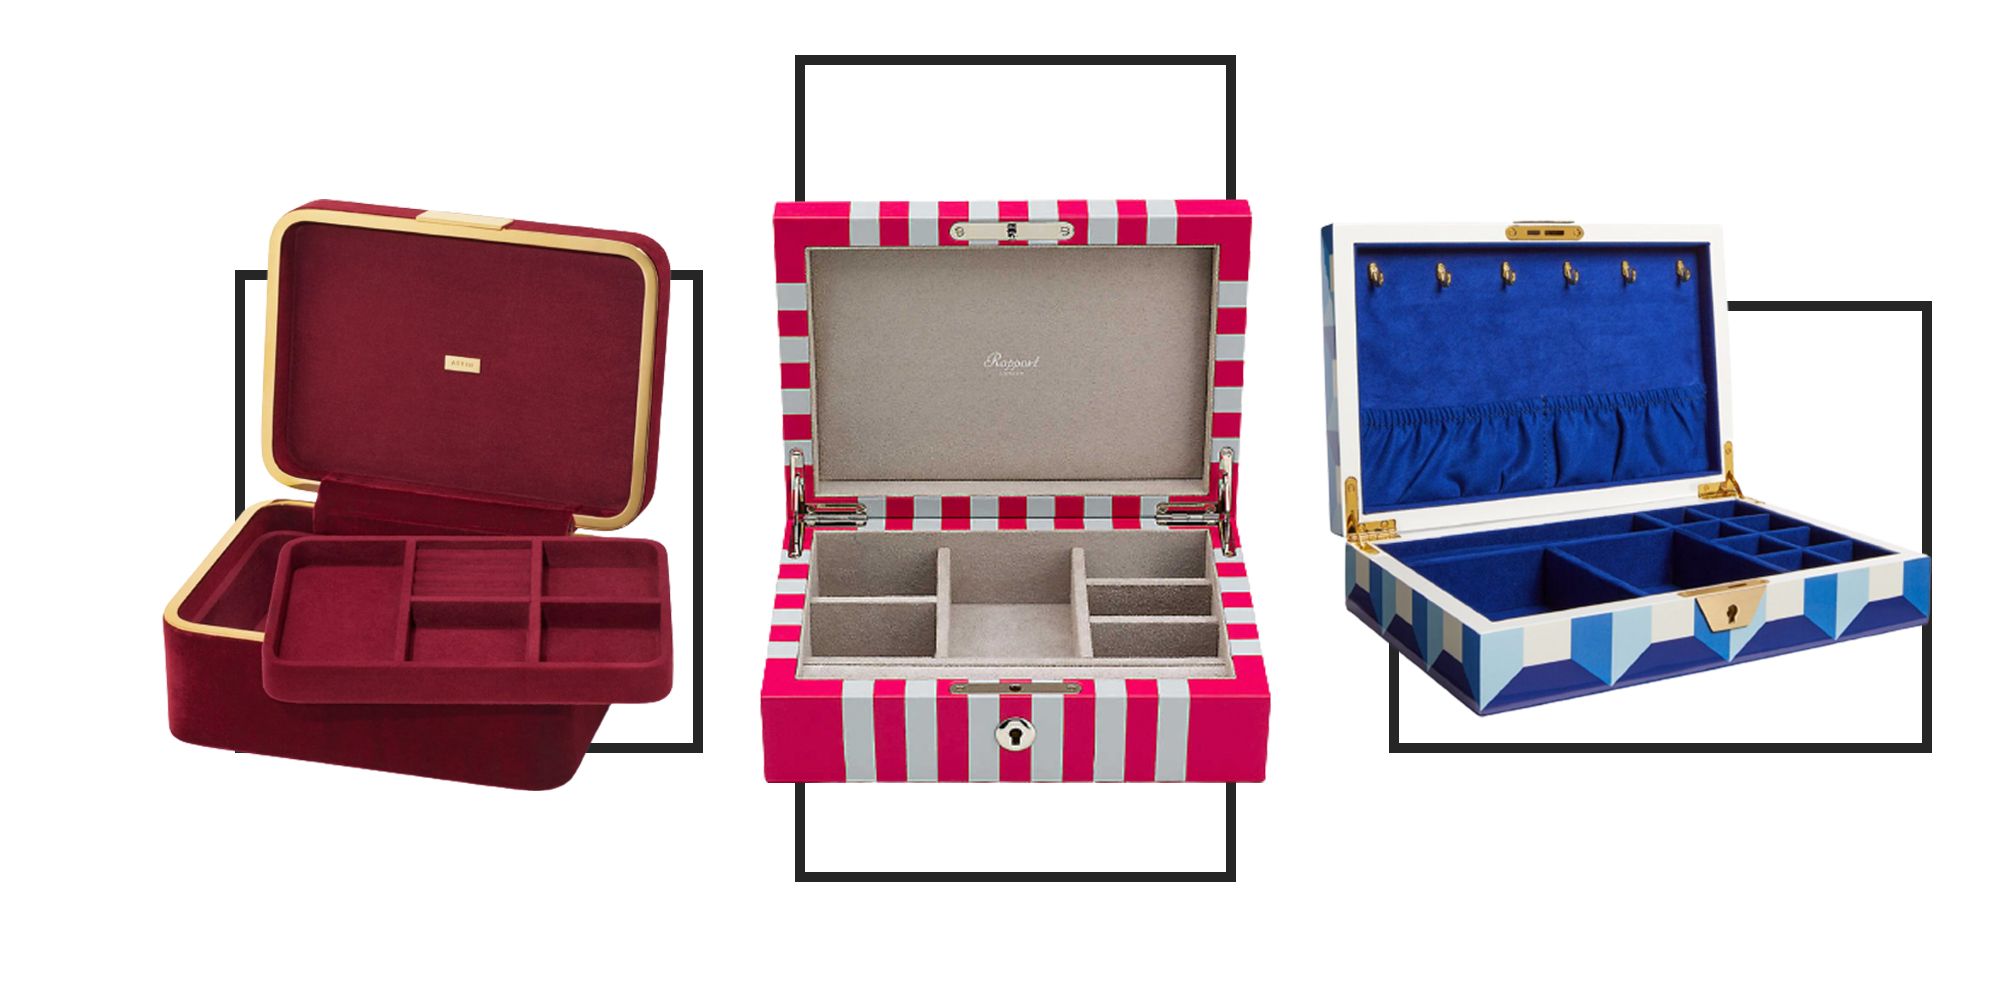 Jewellery Box - Luxury Boxes - Trunks and Travel